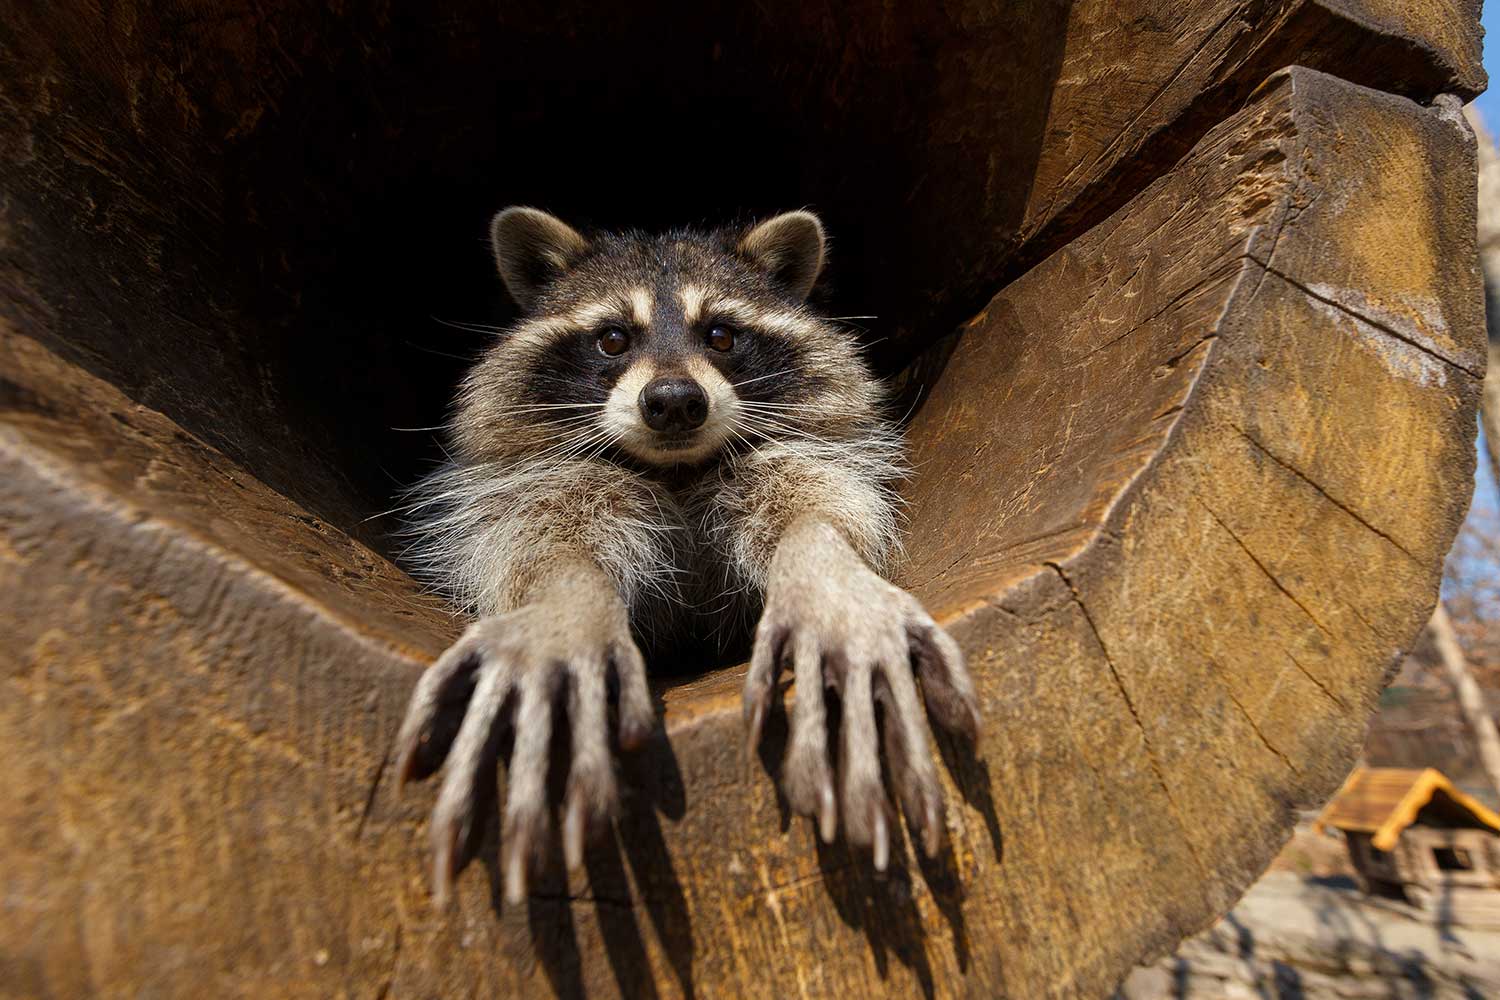 A raccoon at the end of a hole in a fallen tree trunk with its paws sticking out.